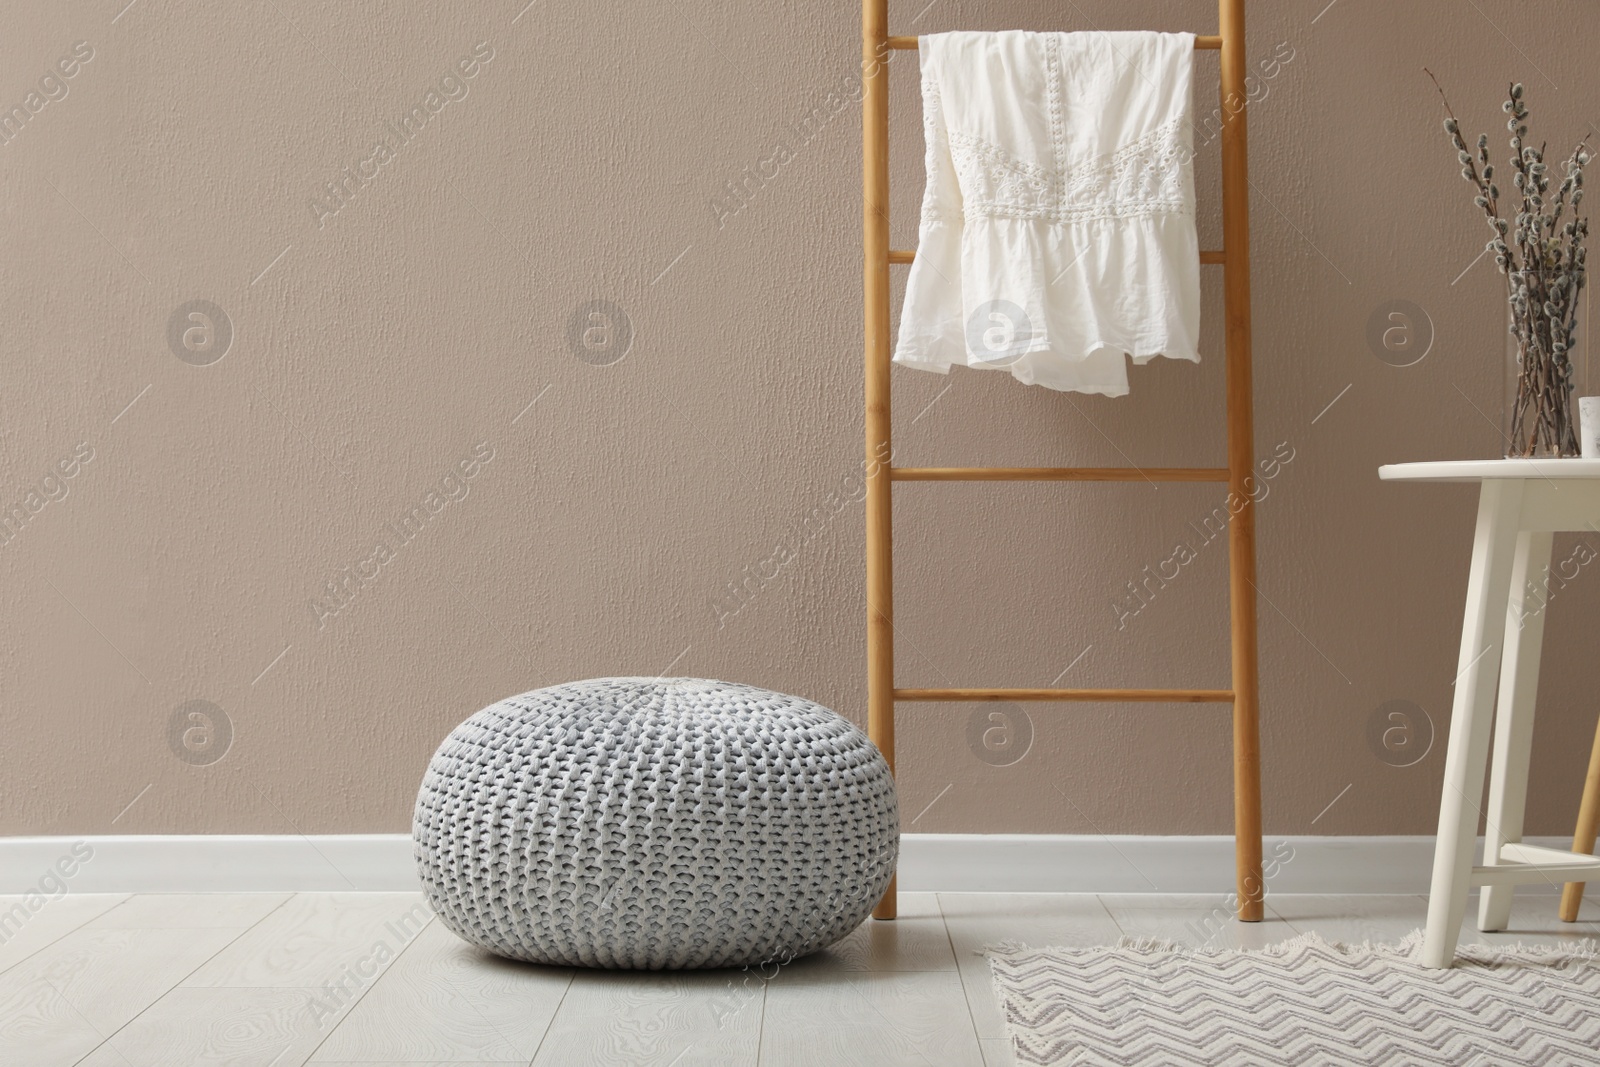 Photo of Stylish room interior with pouf, ladder and decor elements. Space for text